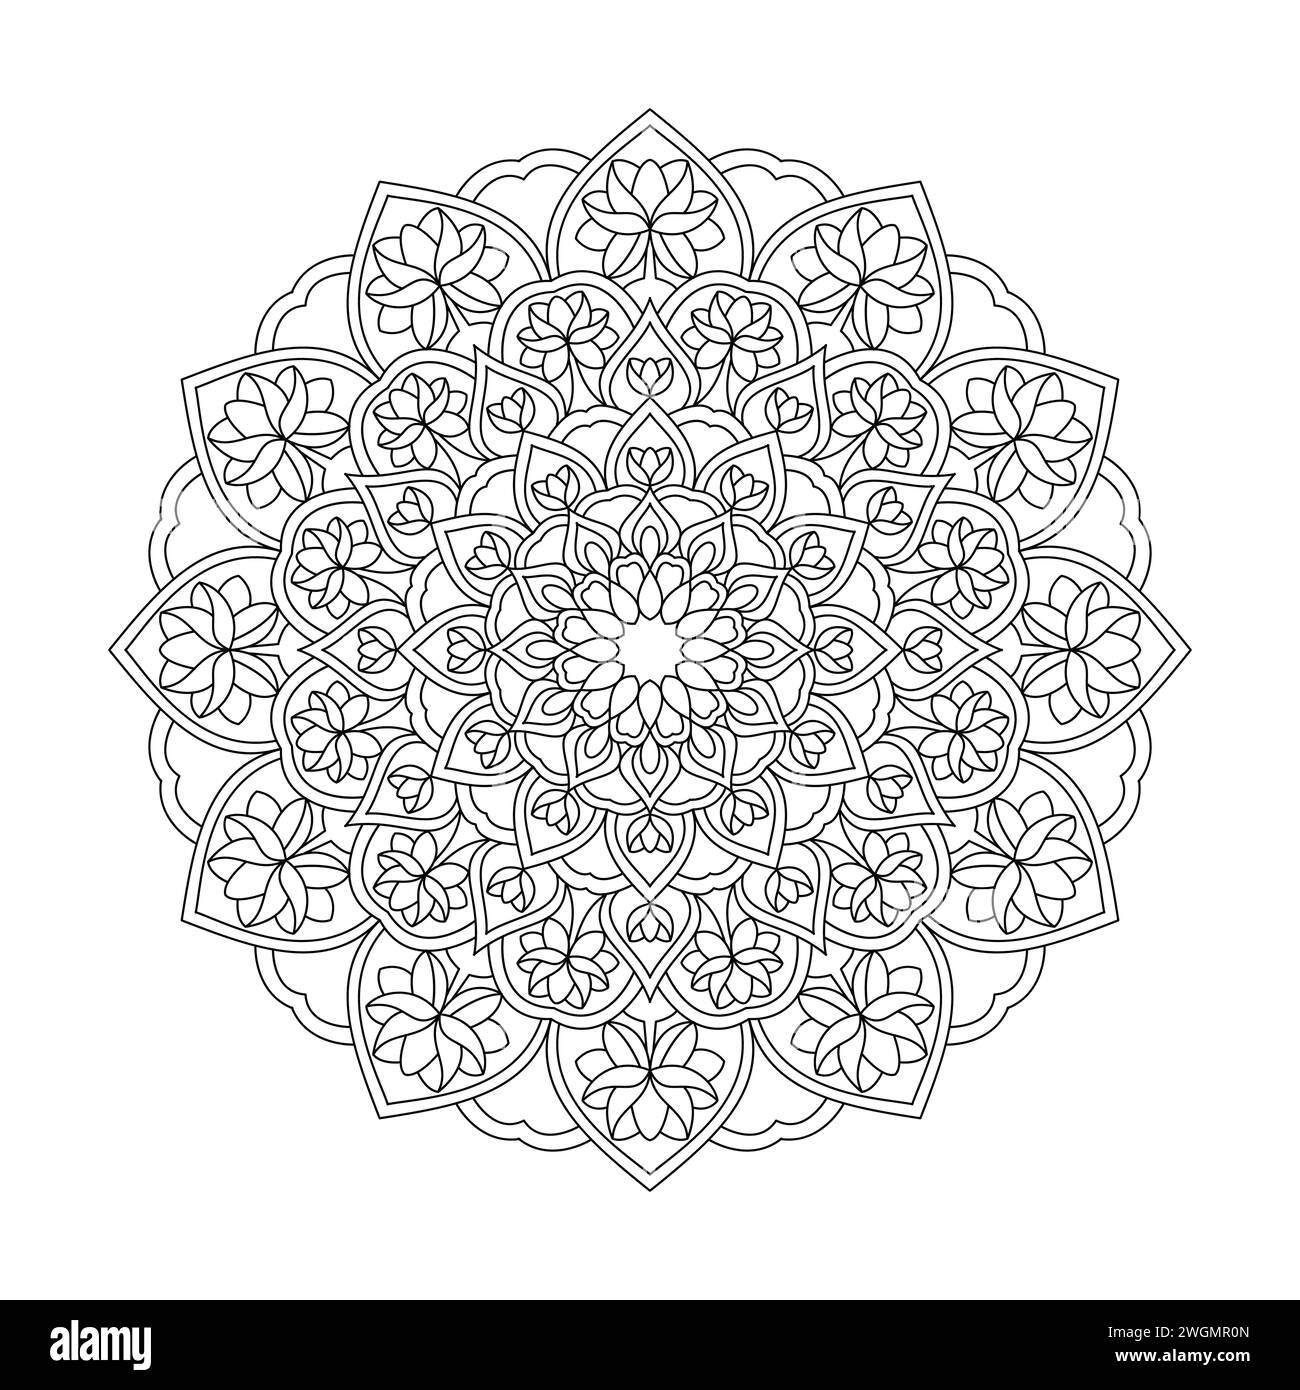 Peaceful Floral Mandala Colouring Book Page for KDP Book Interior. Peaceful Petals, Ability to Relax, Brain Experiences, Harmonious Haven, Peaceful Stock Vector